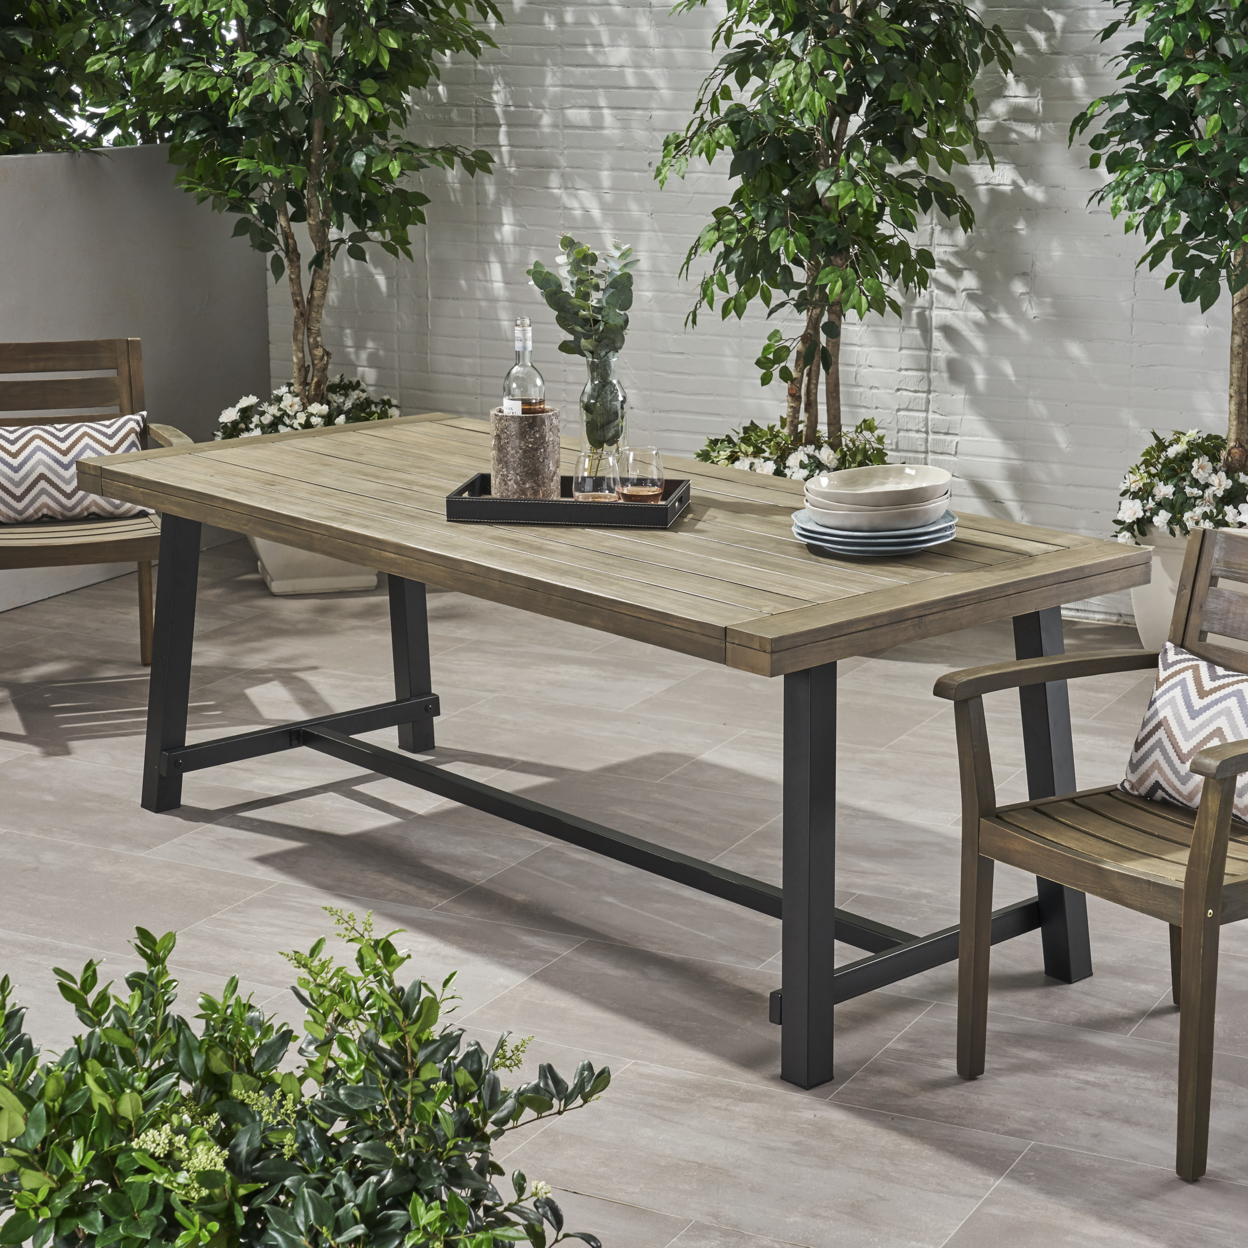 Beau Outdoor Eight Seater Wooden Dining Table - Light Gray Finish + Black Finish